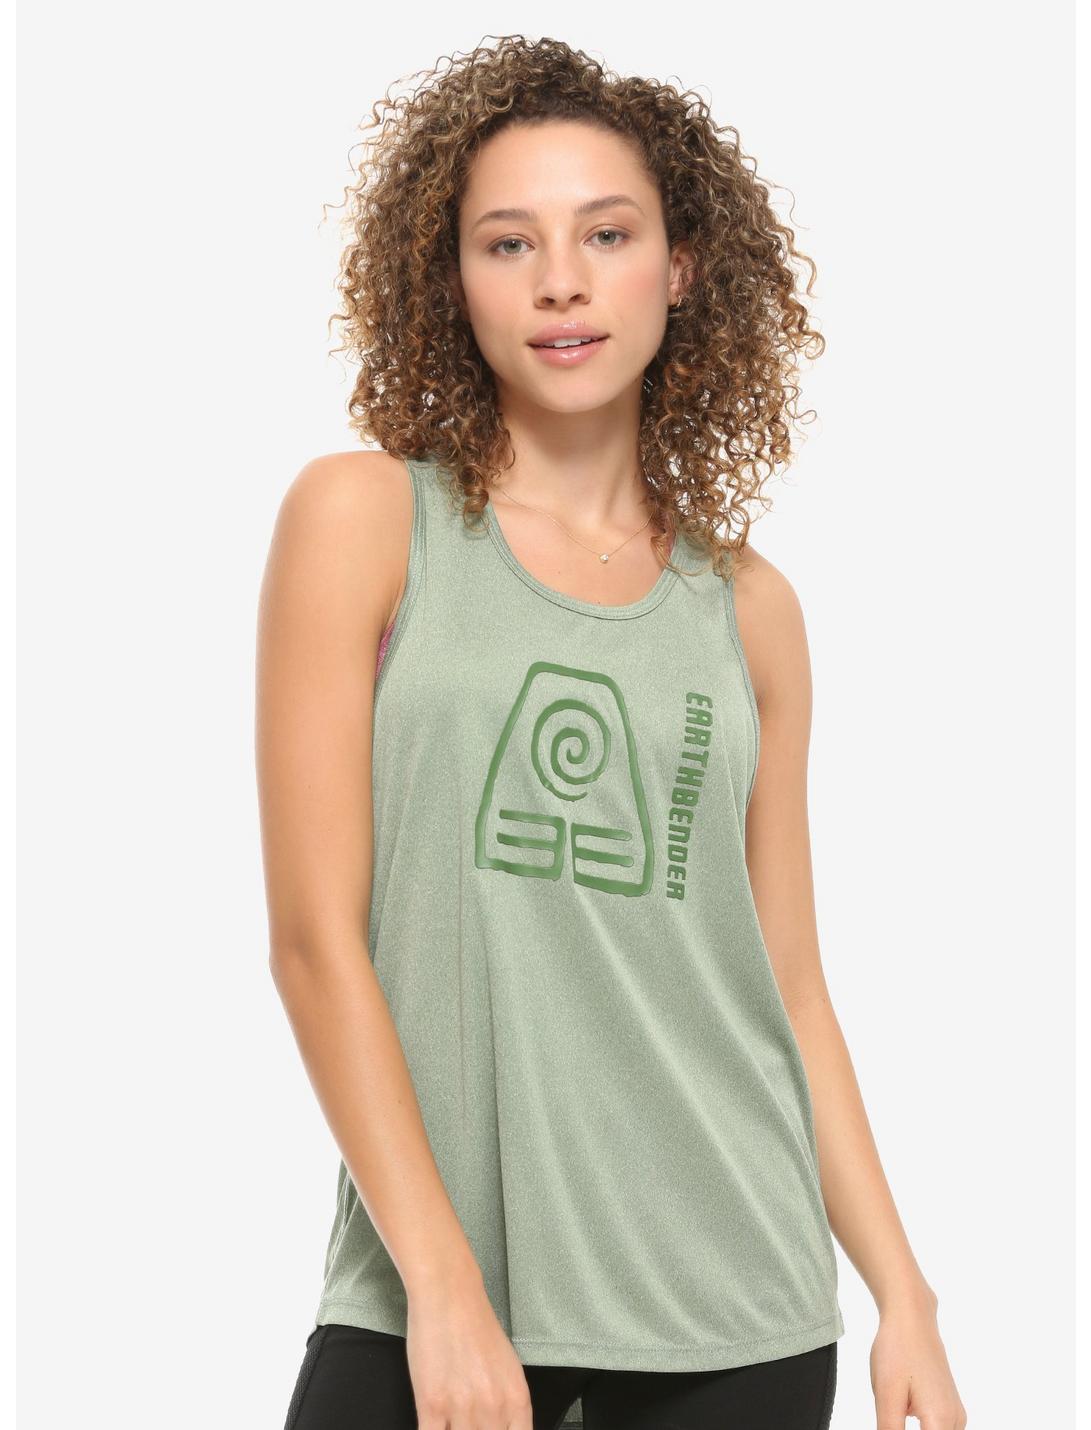 Avatar: The Last Airbender Earth Kingdom Women's Active Tank Top - BoxLunch Exclusive, GREEN, hi-res